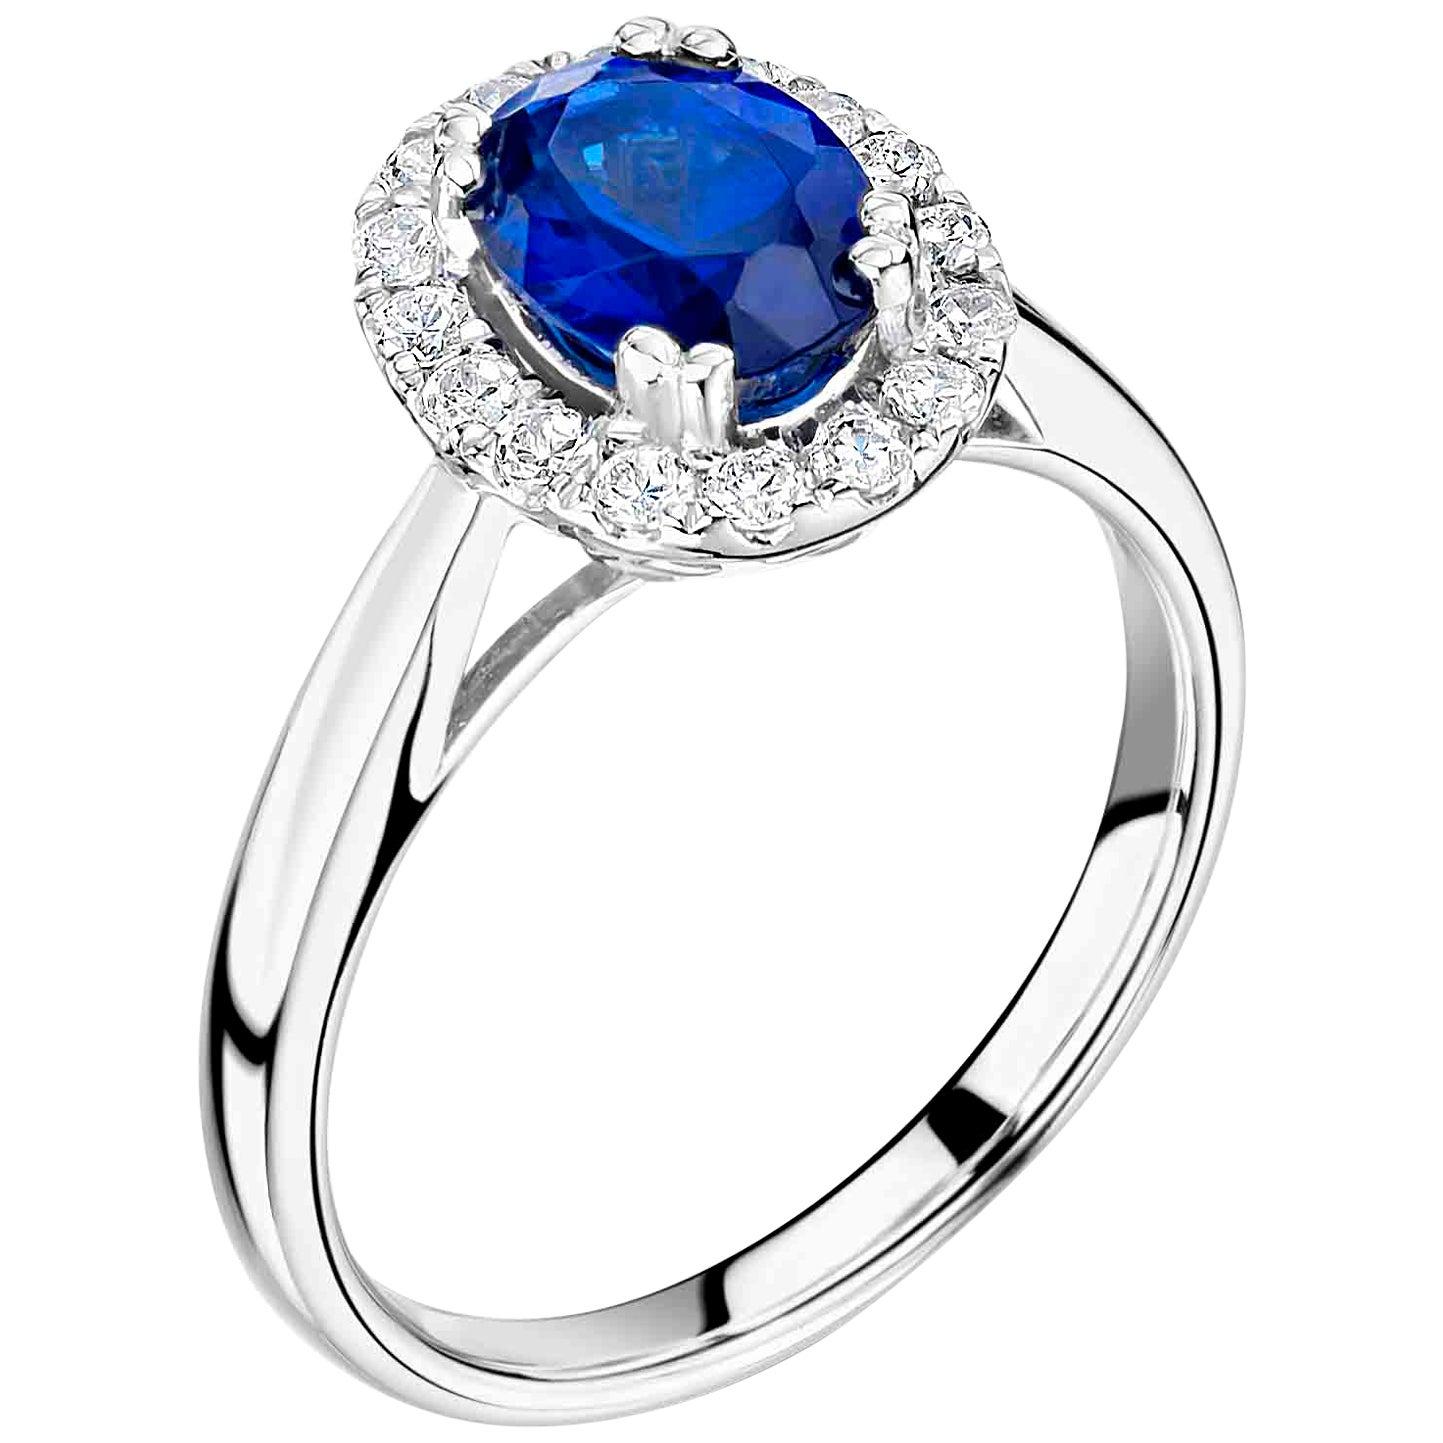 Round Cut 1 Carat Royal Blue Ceylon Sapphire Engagement Ring in a Diamond Halo For Sale